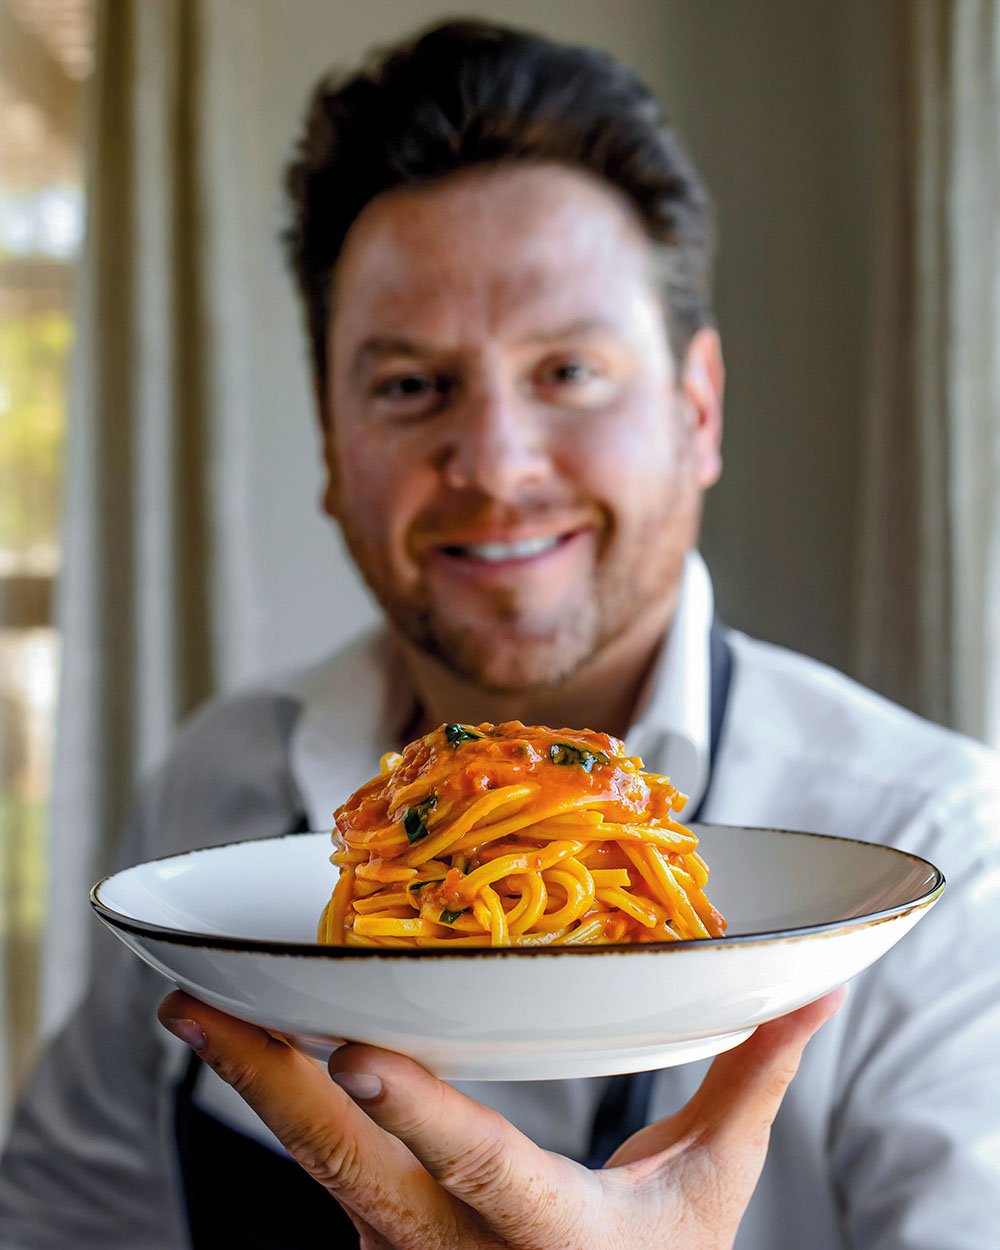 Pasta Pomodoro recipe. Reprinted with permission from Peace Love and Pasta by Scott Conant, © 2021 Scott Conant. Published by Abrams. Photographs © 2021 Ken Goodman.